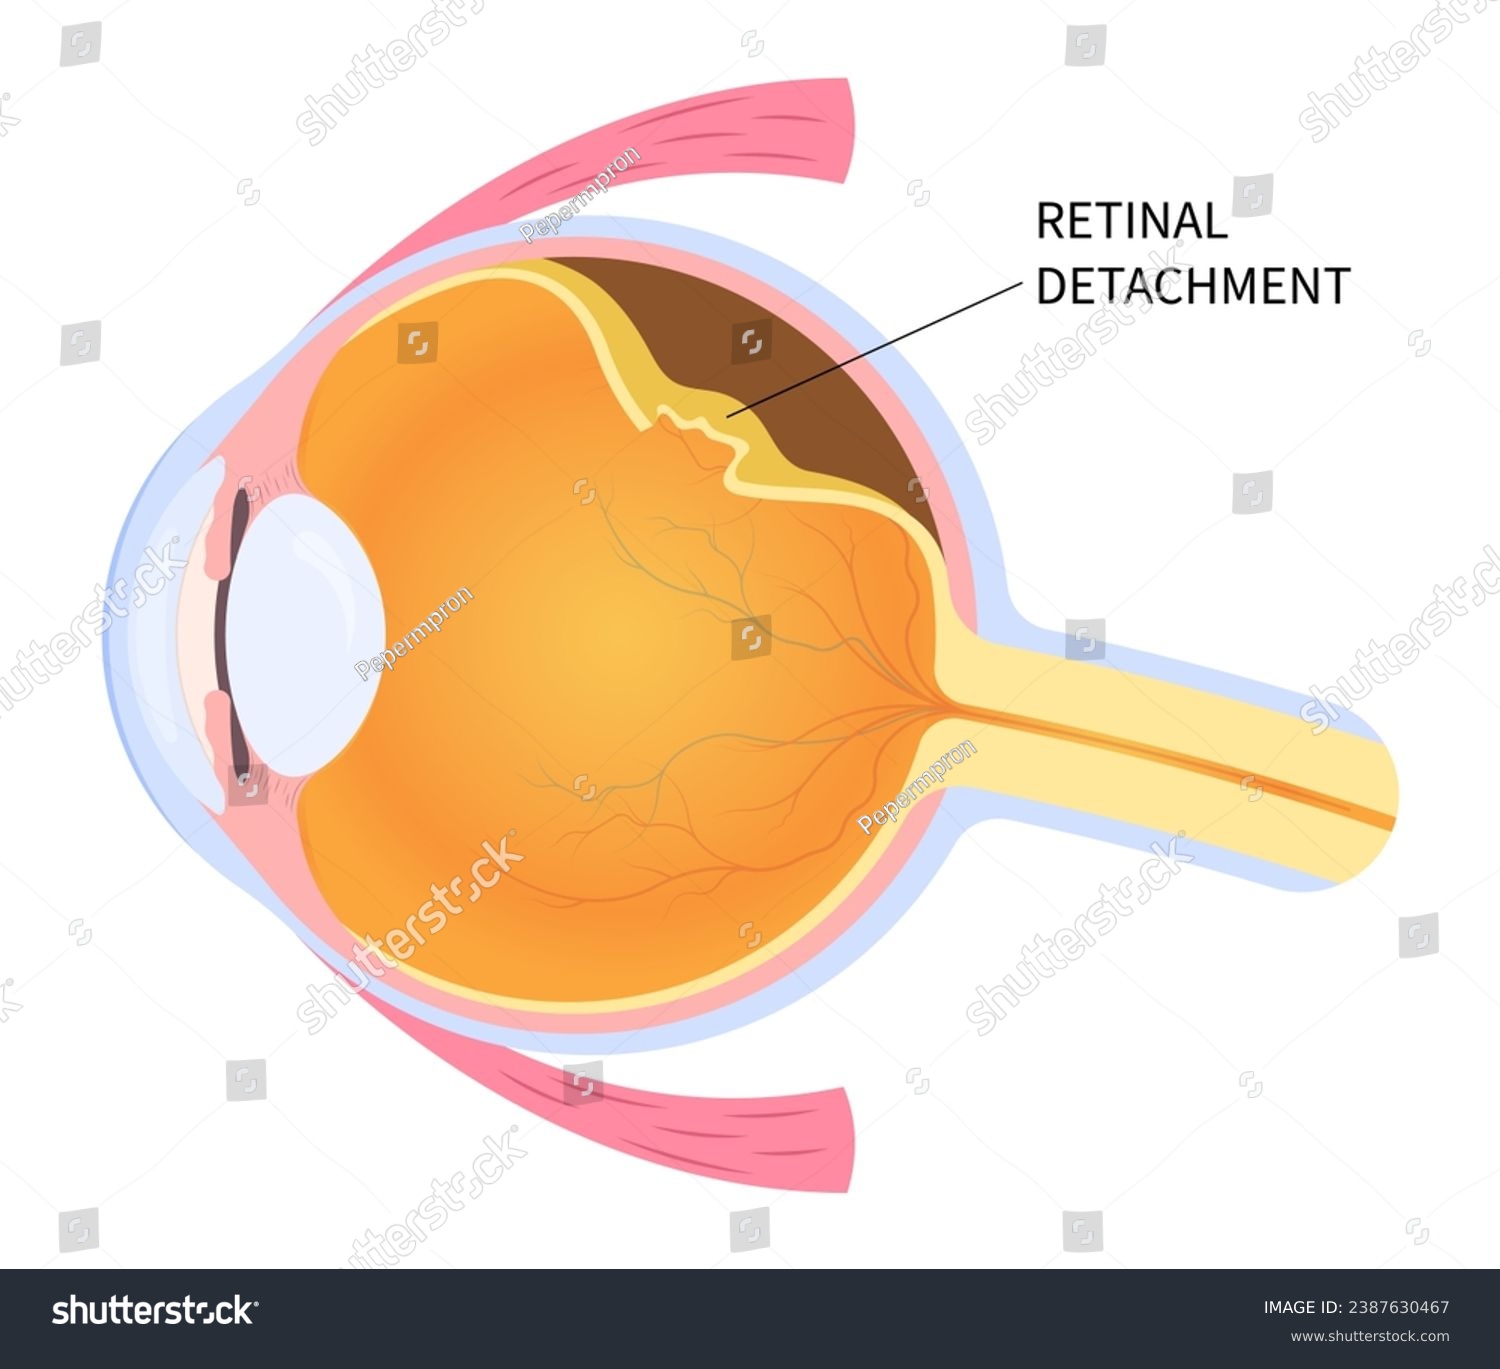 SVG of Eye blurred vision loss with floaters Myopia and detached retina after trauma injury of macular hole that tear or torn which lead to pain in nearsighted svg